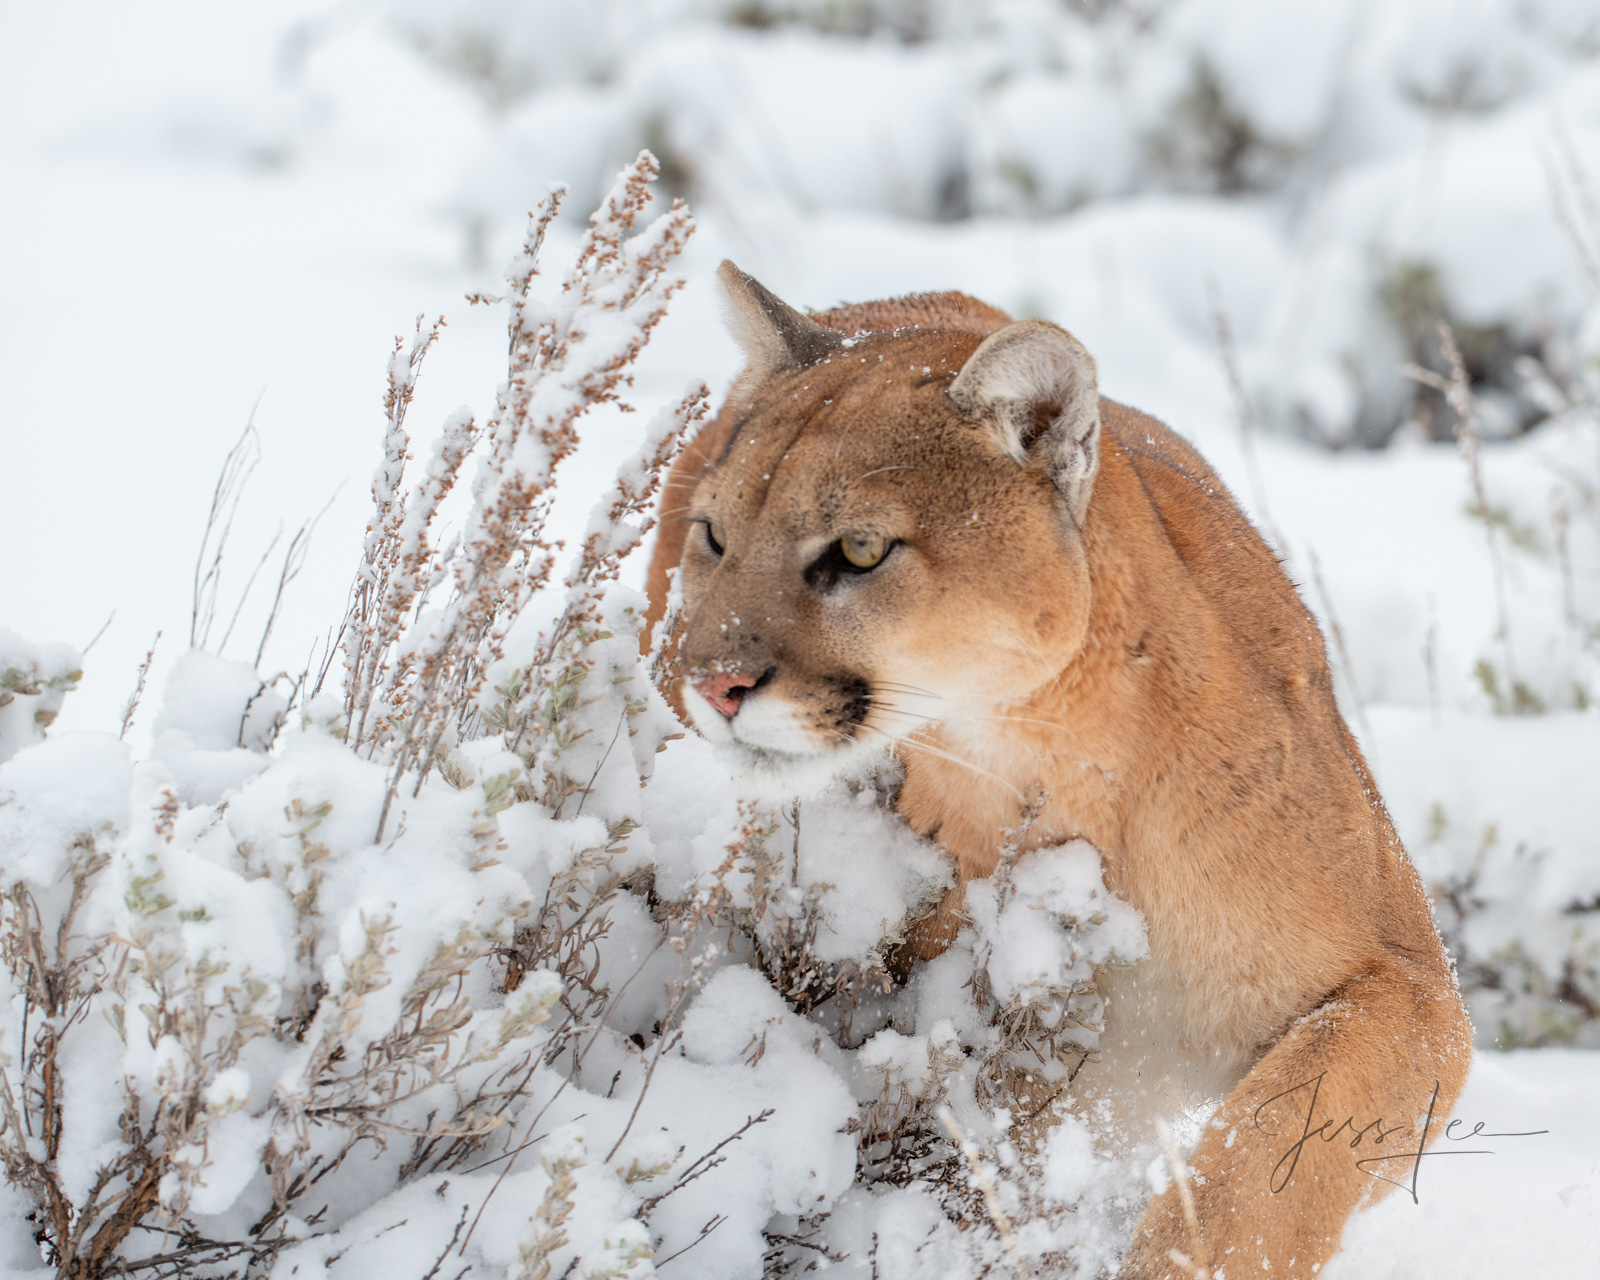 Mountain Lion Photo | Pictures taken in the wild by a chance encounter with a Cougar while searching for iconic western North...